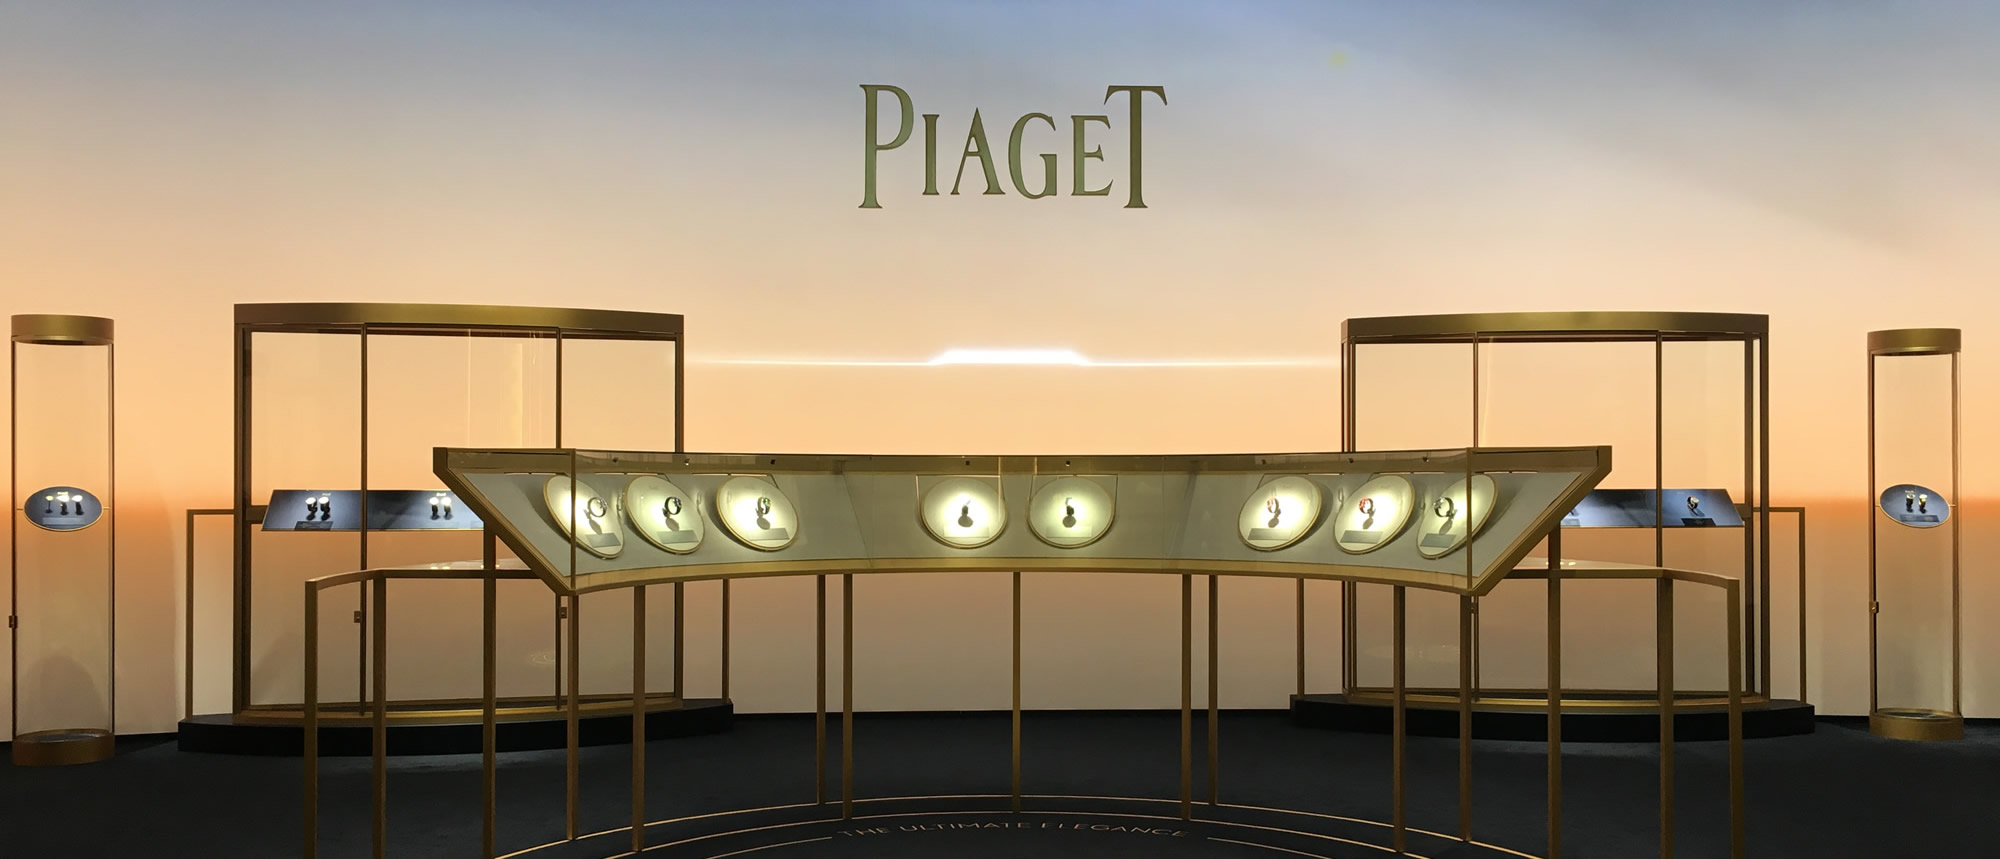 Stand Piaget SIHH 2017